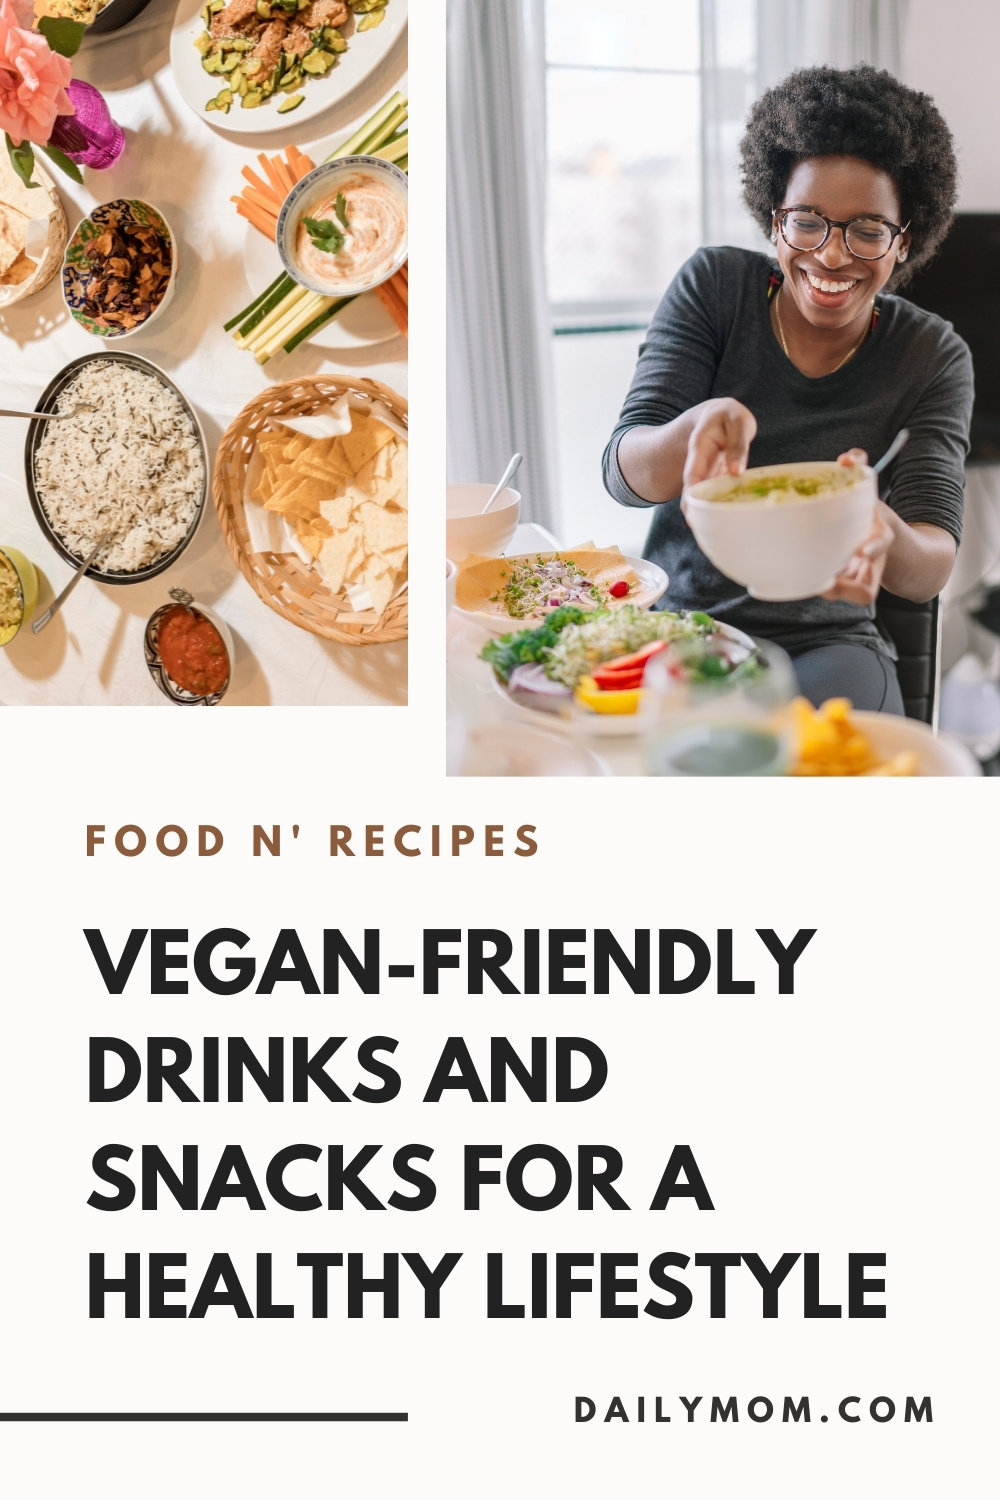 23 Vegan-Friendly Drinks And Snacks For A Healthy Lifestyle